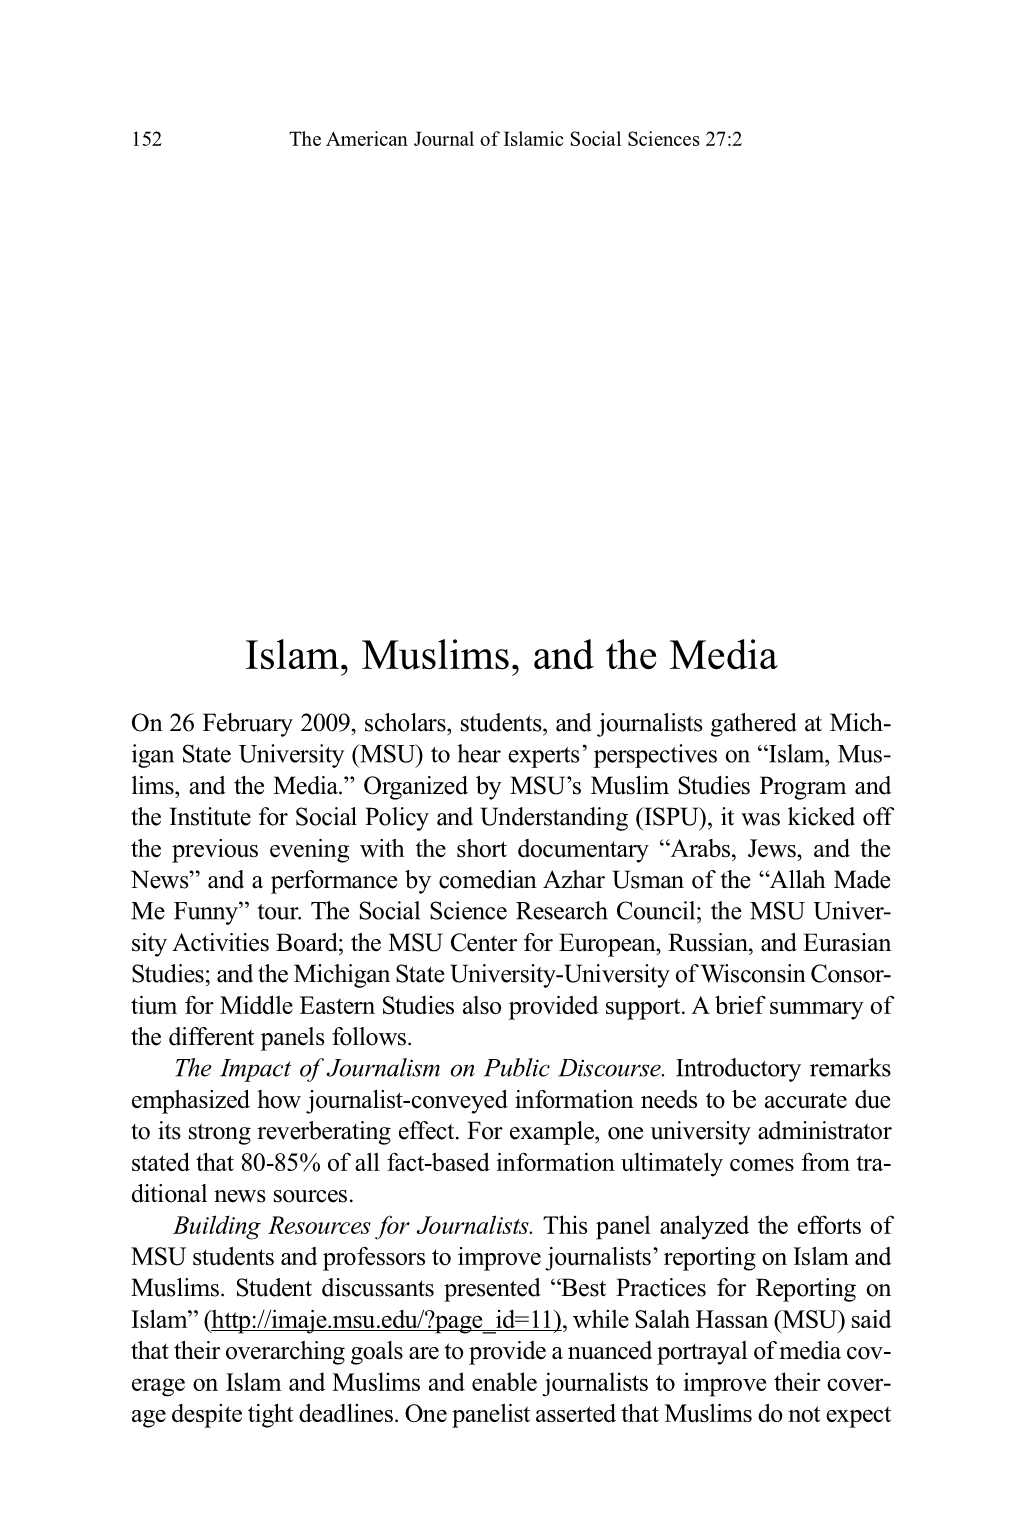 Islam, Muslims, and the Media